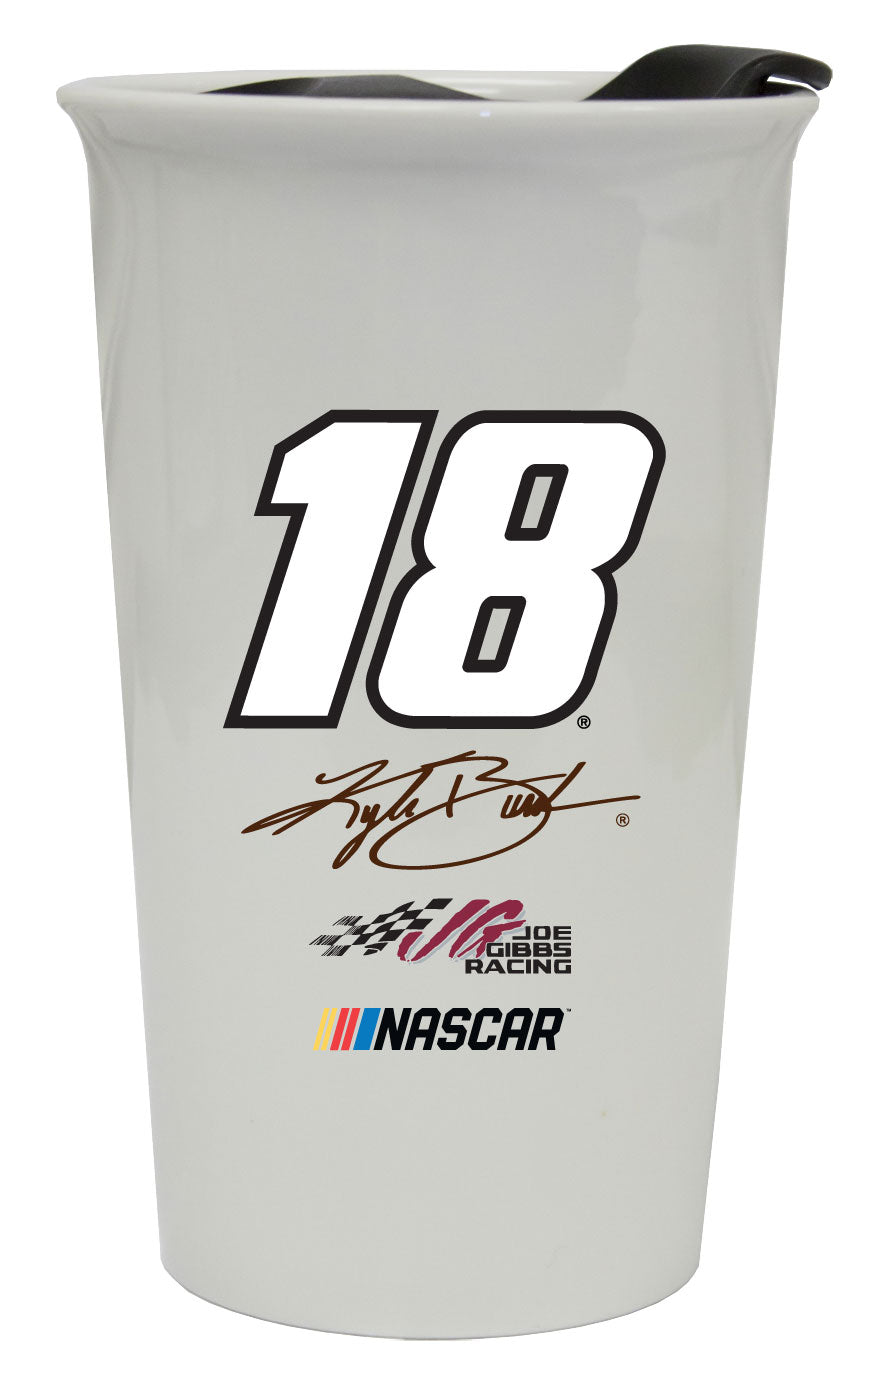 R and R Imports Kyle Busch #18 NASCAR Double Walled Ceramic Tumbler New for 2020